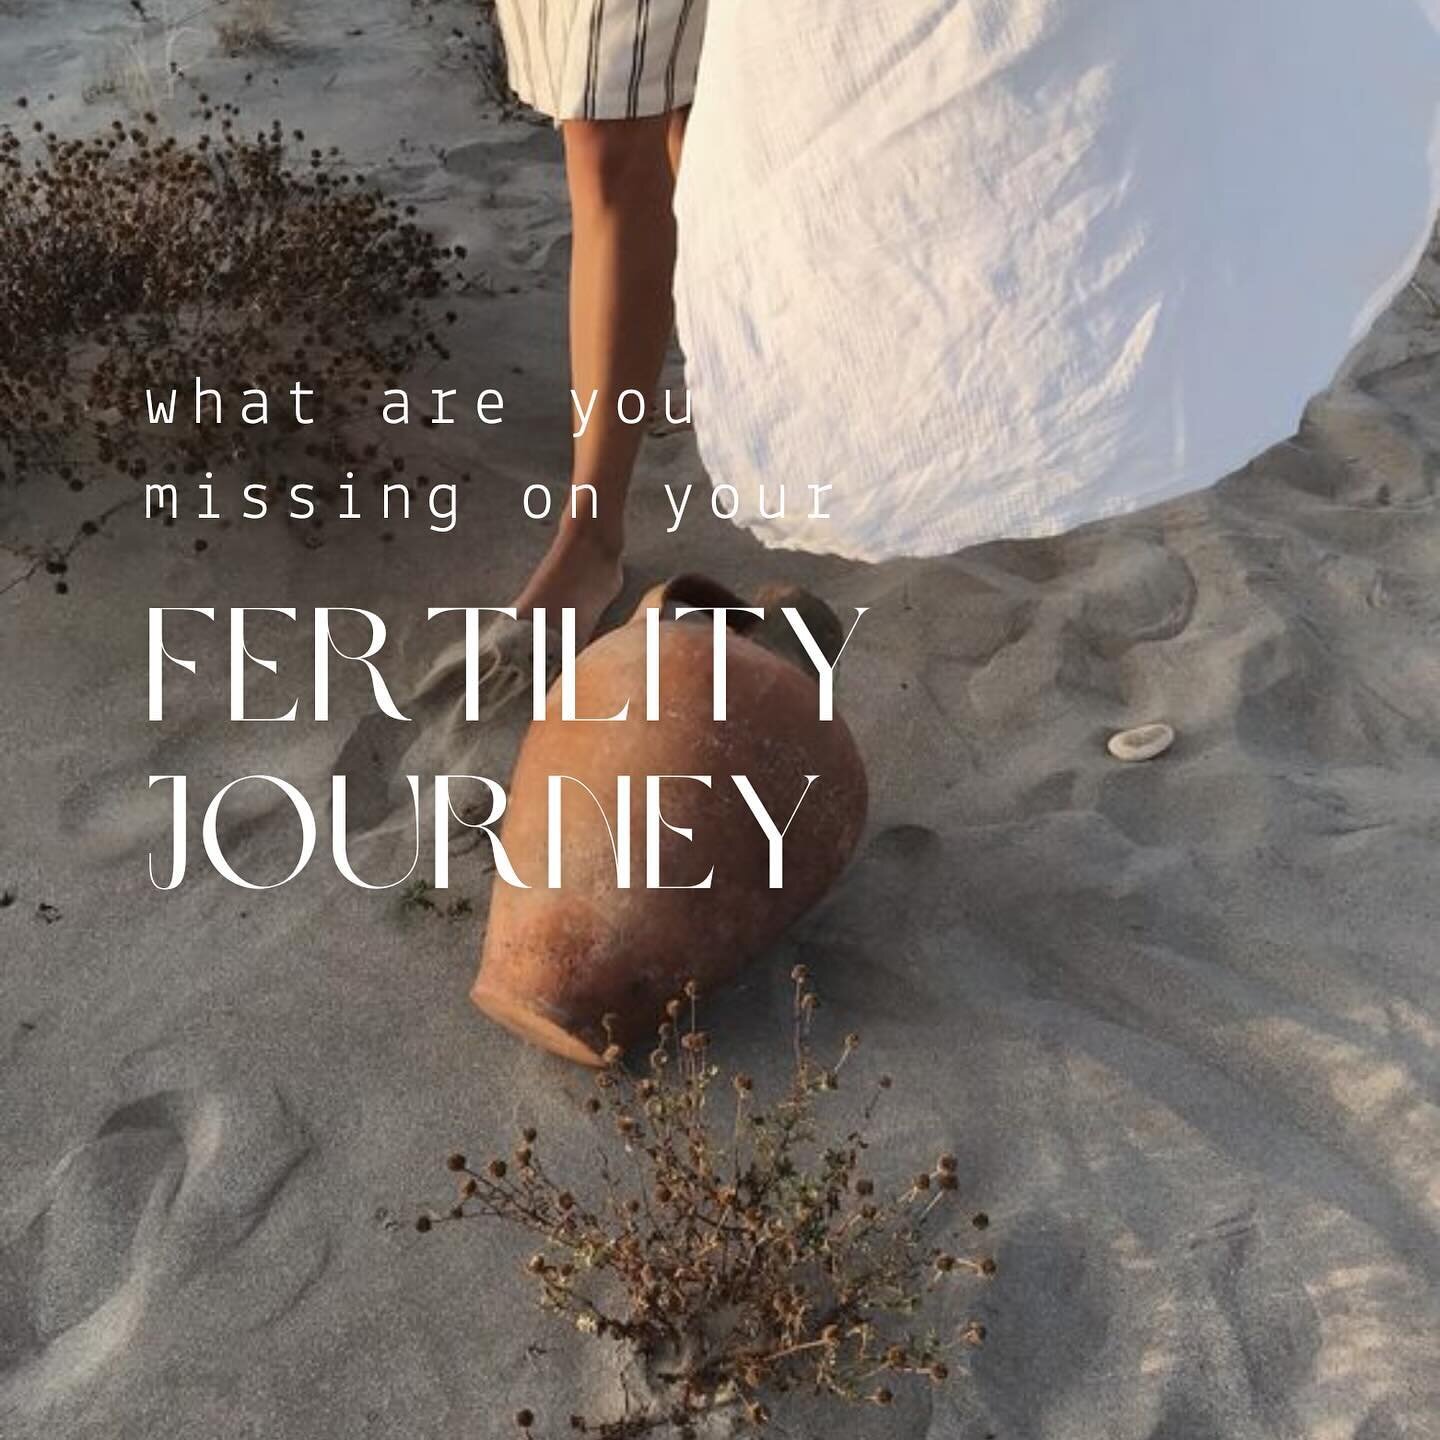 The fertility journey can be emotional, hard and frustrating, and many don&rsquo;t know where to look to get answers. They also don&rsquo;t know what to consider addressing when things aren&rsquo;t going as planned. 
💔
These slides give those strugg